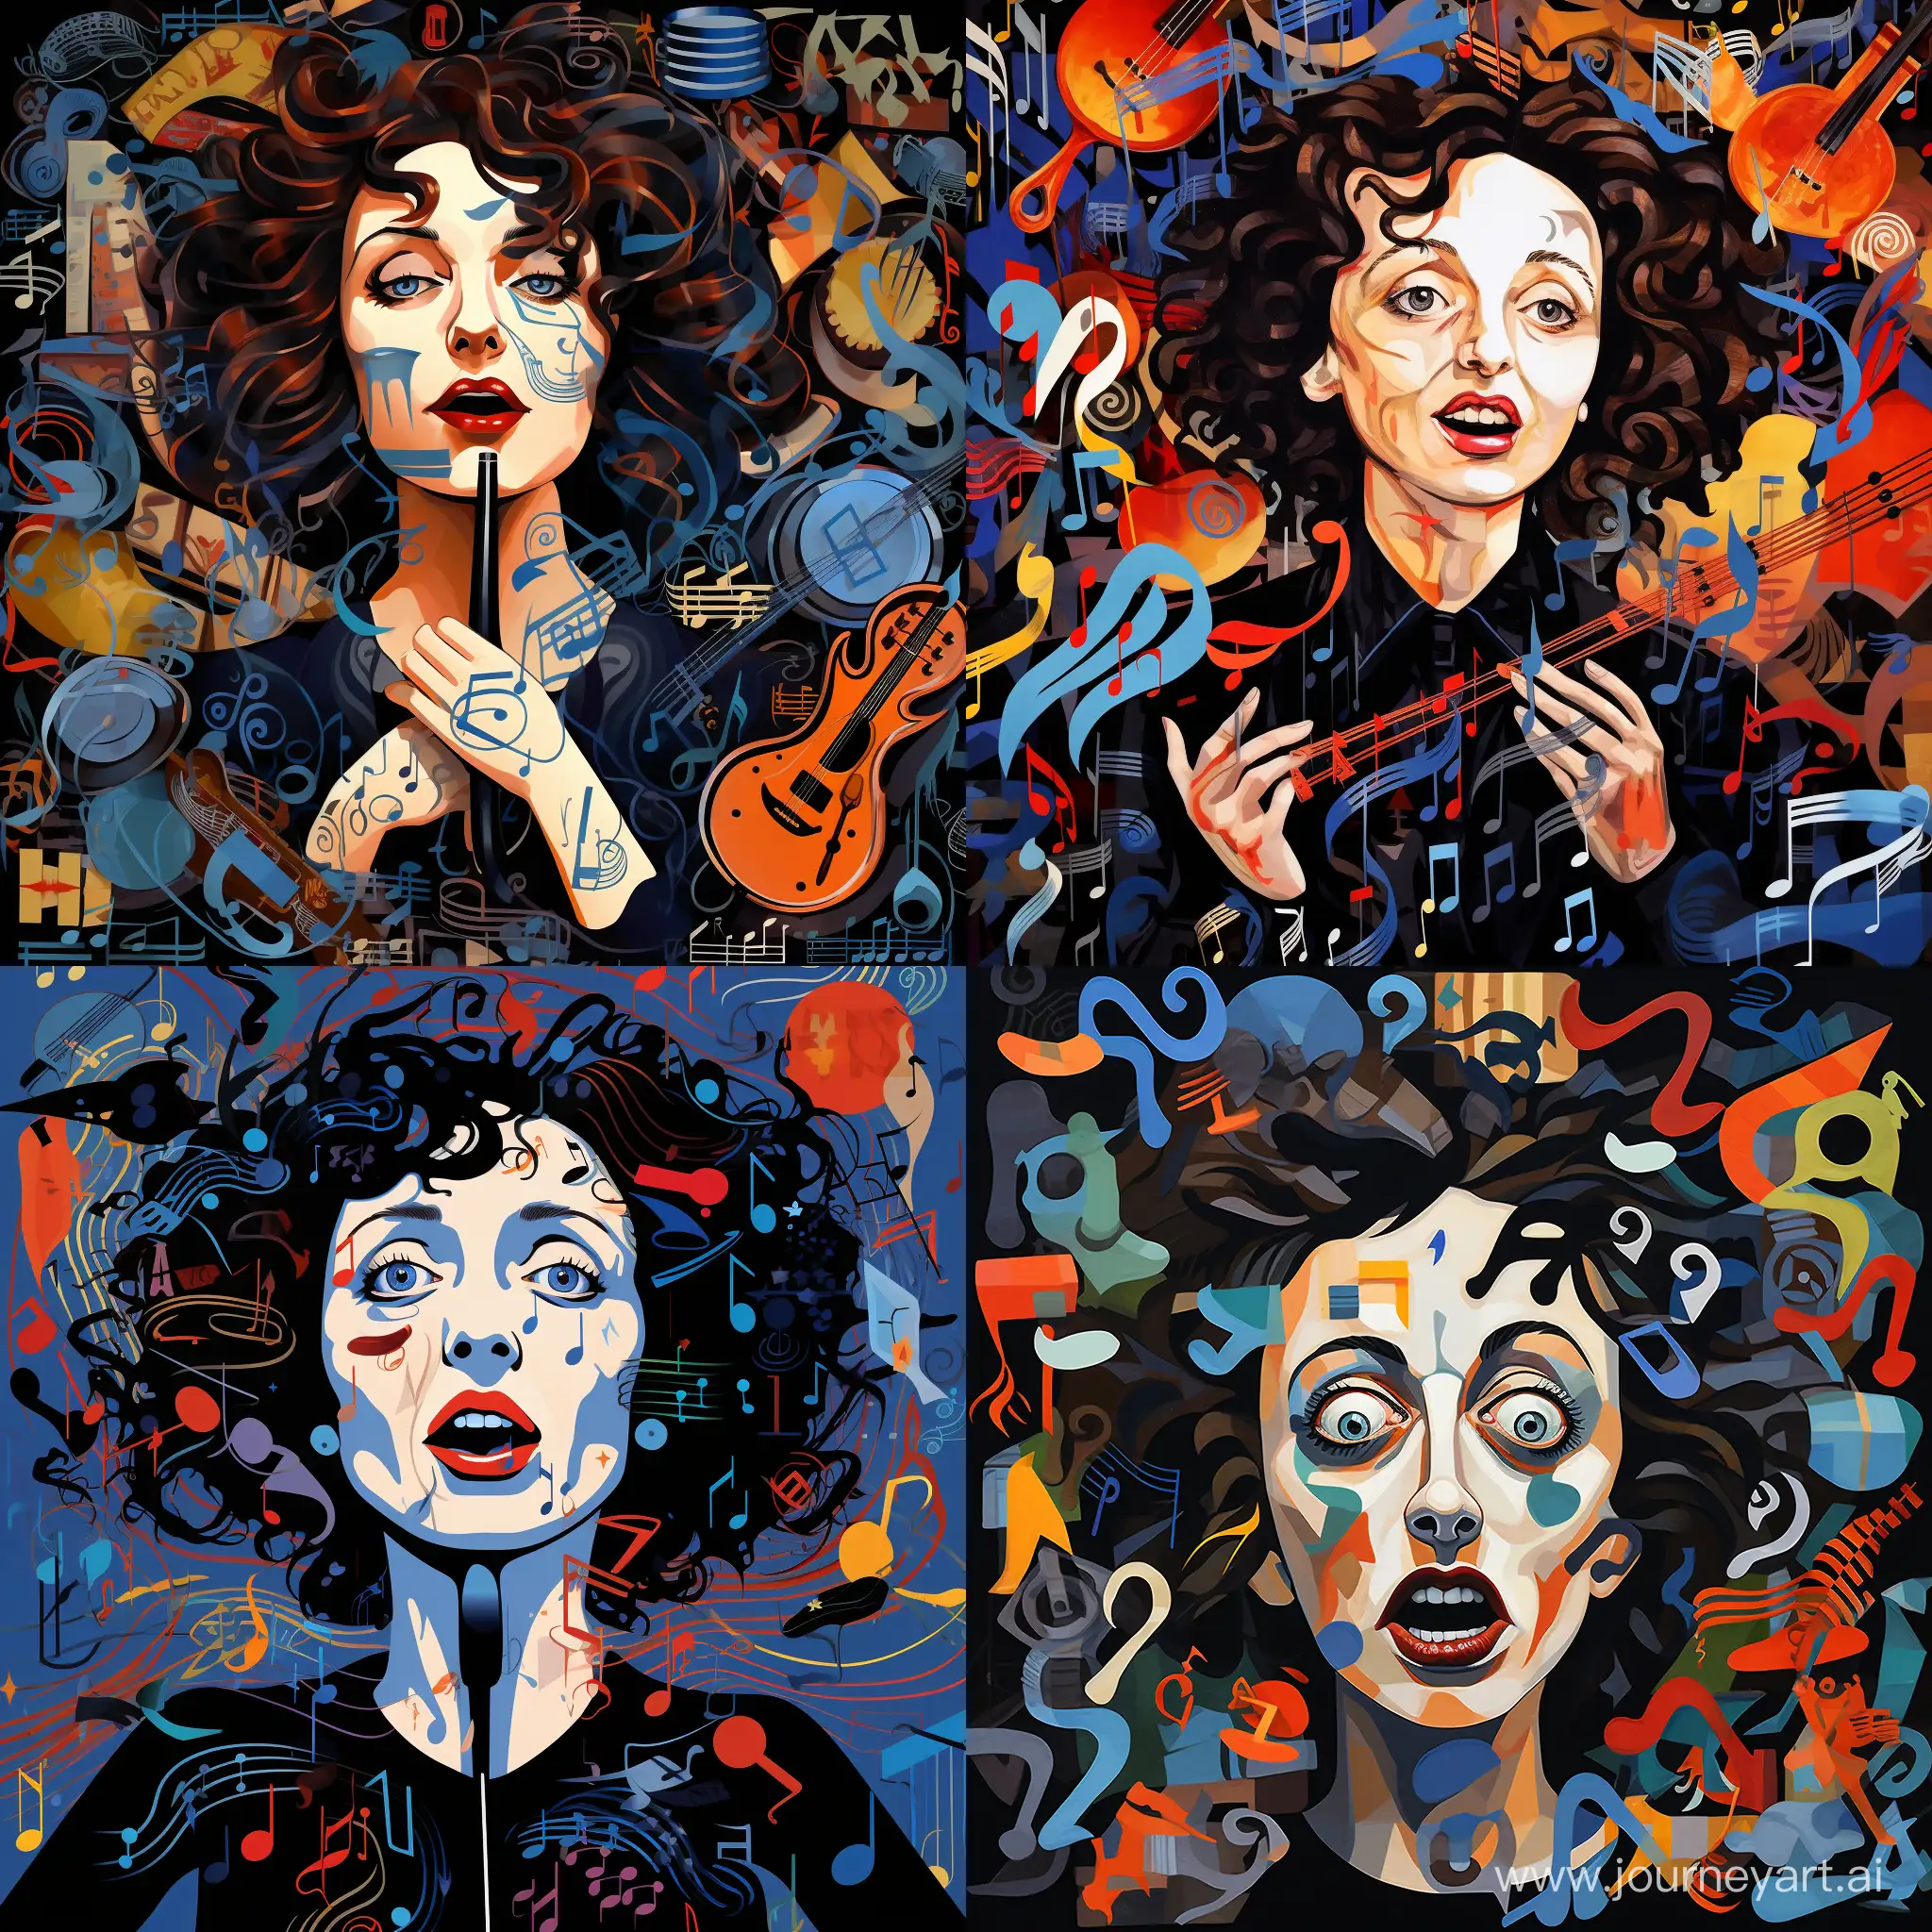 Edith-Piaf-Performing-Amidst-Musical-Symbols-in-Dynamic-Pop-Art-Style